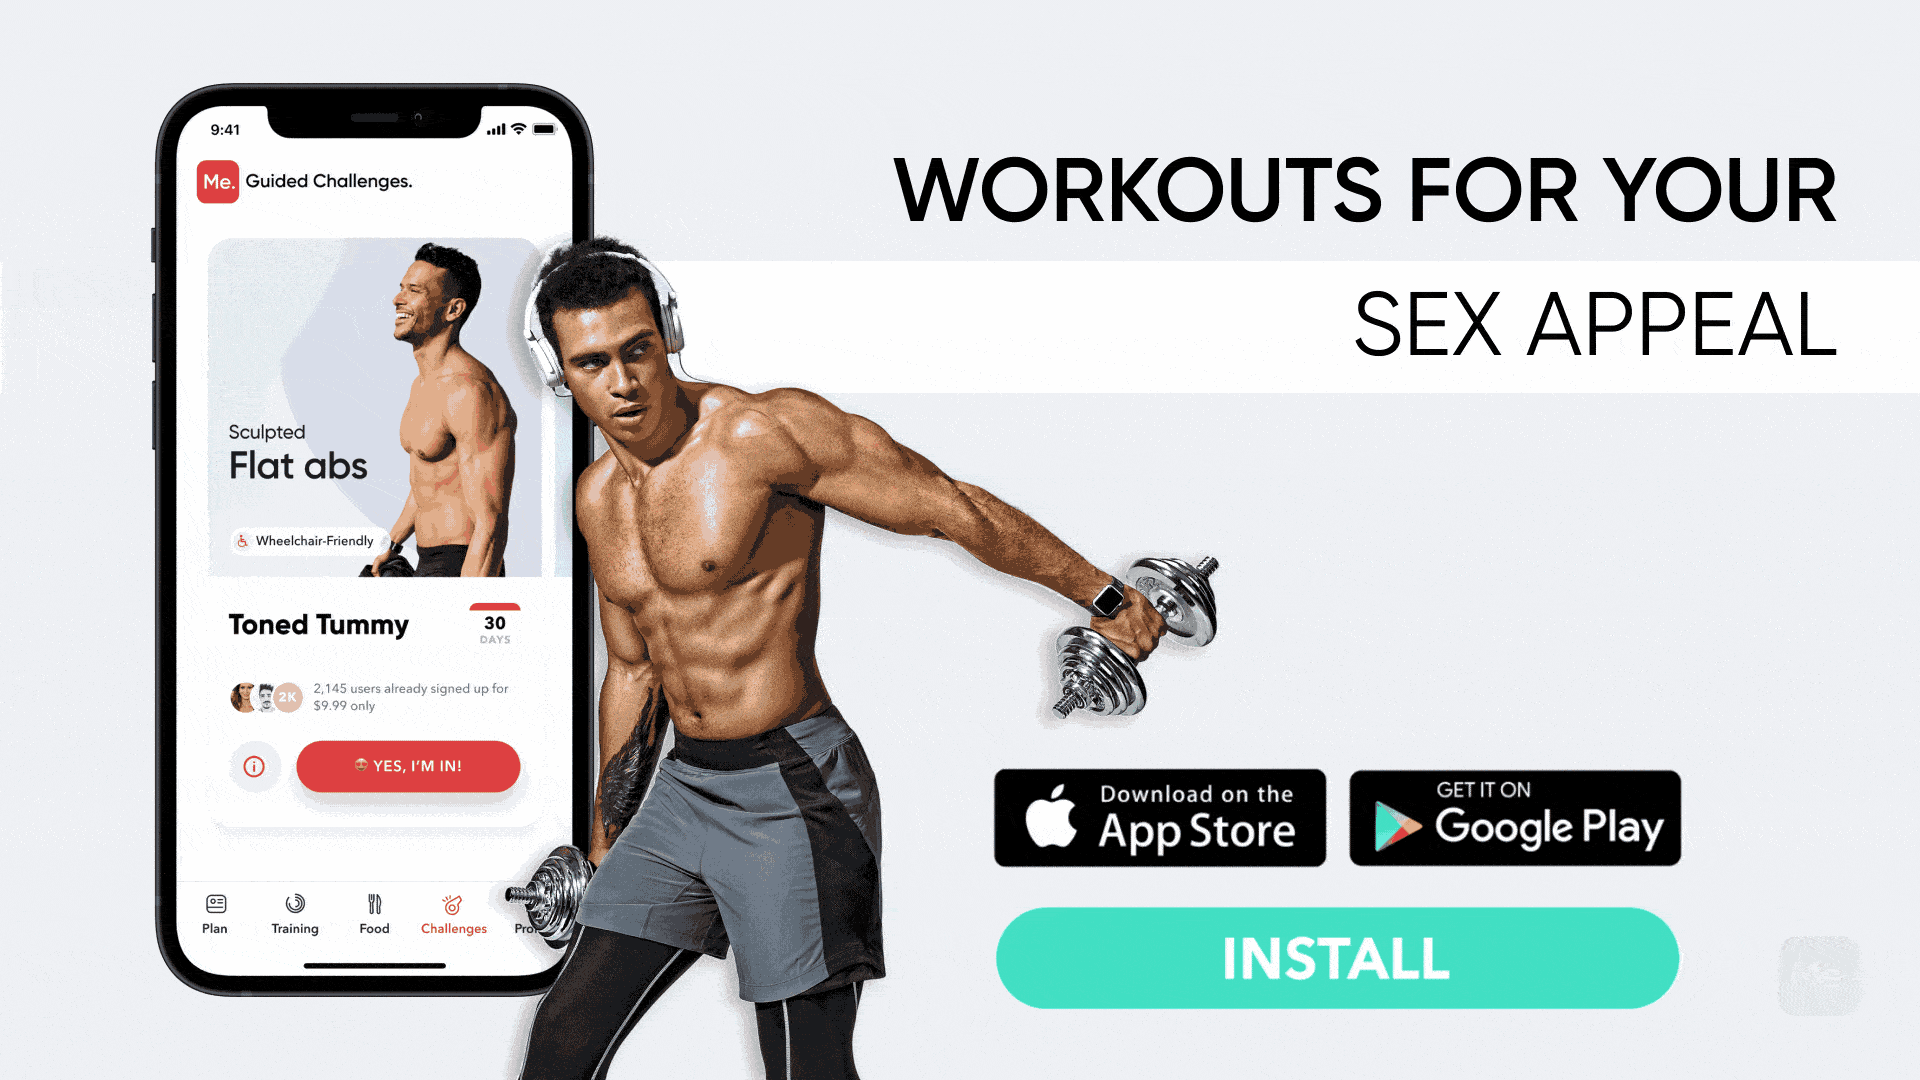 Workouts for your sex appeal